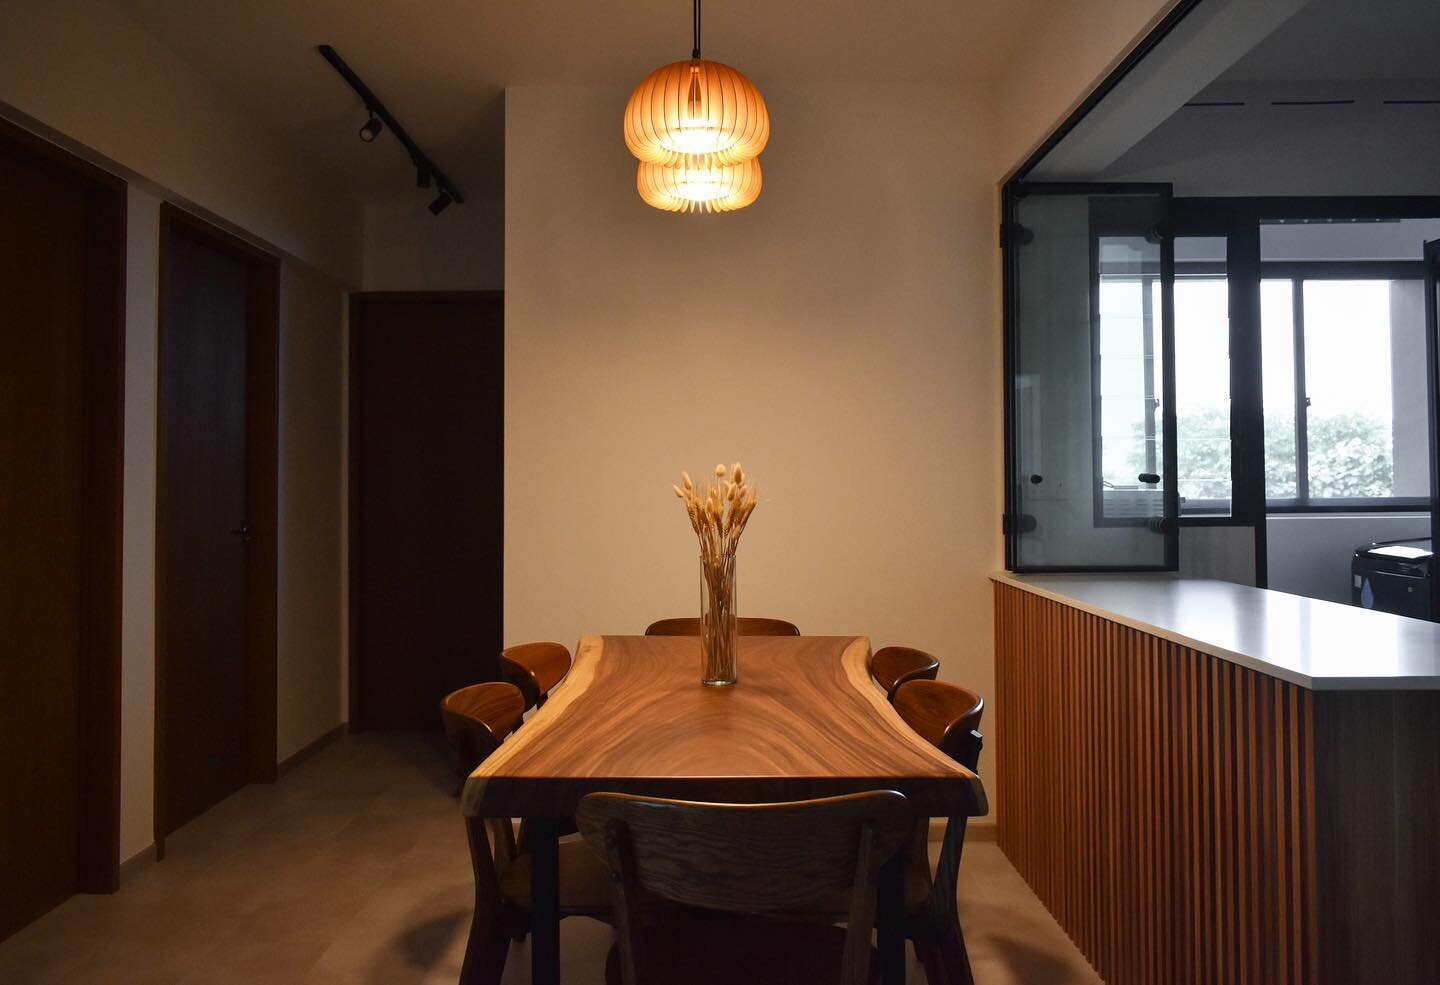 Cozy dining area and a flexible open concept kitchen🥃

A warm pendant light to complement the wood textures and cement vinyl flooring

#interiordesign #interior #interiordesigner #renovation #massingdesign #renovations #kitchen #kitchendesign #kitch